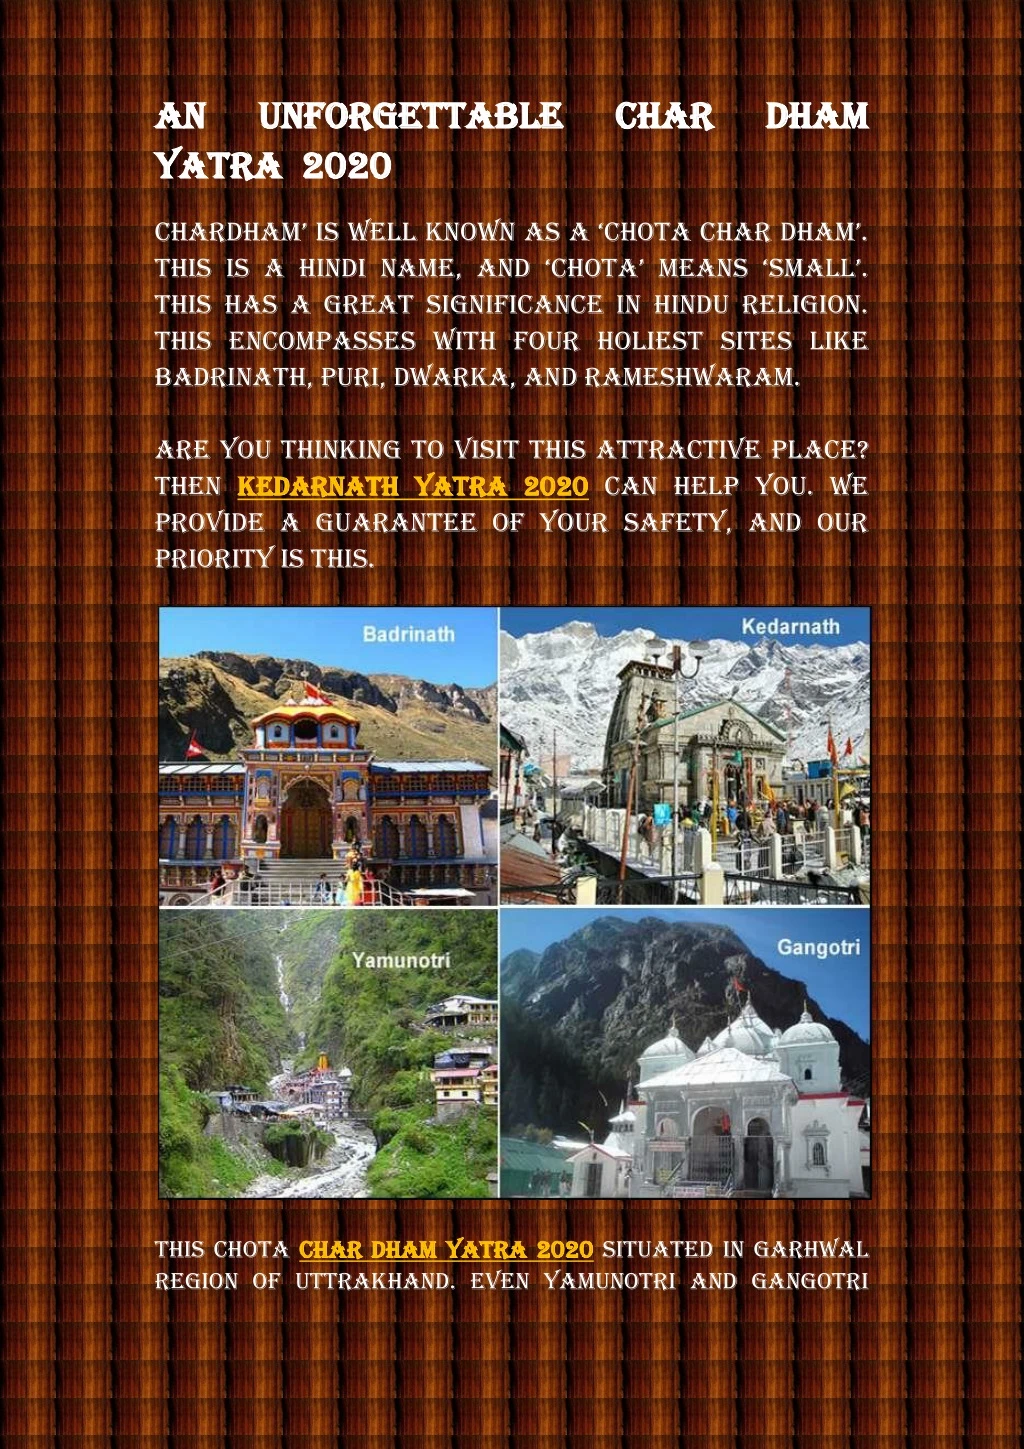 an an yatra yatra 2020 chardham is well known